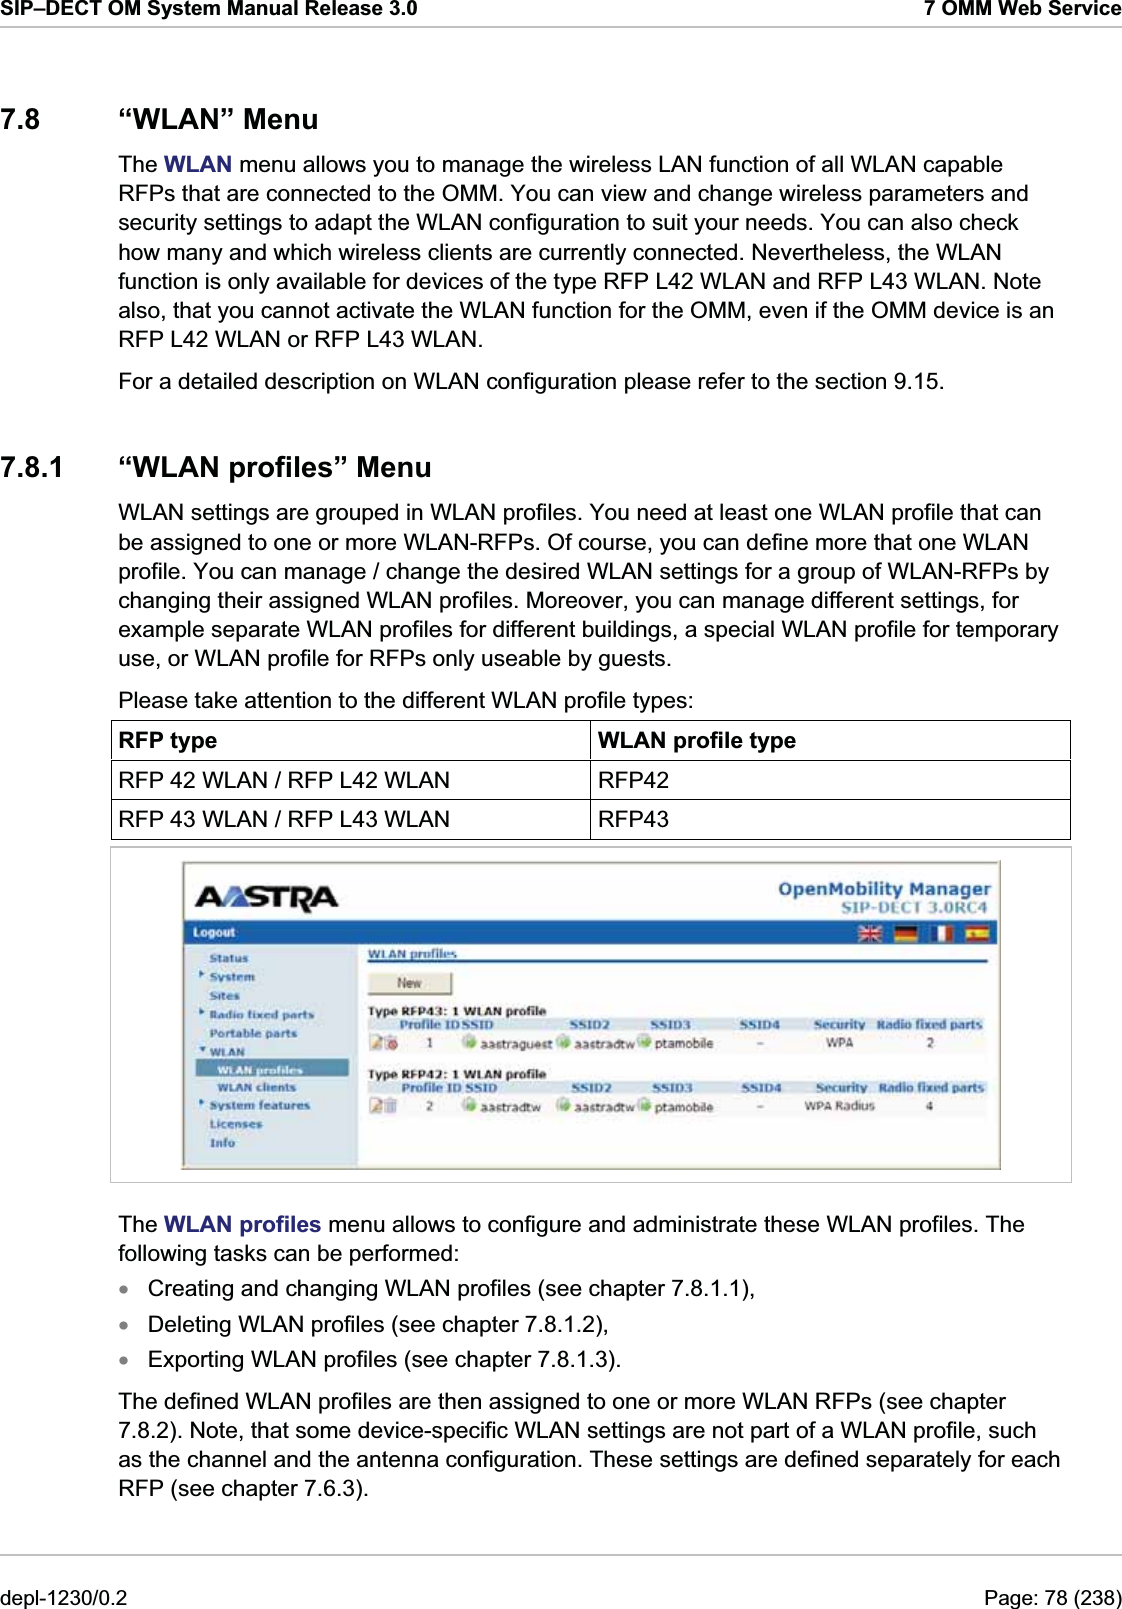 SIP–DECT OM System Manual Release 3.0  7 OMM Web Service 7.8 “WLAN” Menu The WLAN menu allows you to manage the wireless LAN function of all WLAN capable RFPs that are connected to the OMM. You can view and change wireless parameters and security settings to adapt the WLAN configuration to suit your needs. You can also check how many and which wireless clients are currently connected. Nevertheless, the WLAN function is only available for devices of the type RFP L42 WLAN and RFP L43 WLAN. Note also, that you cannot activate the WLAN function for the OMM, even if the OMM device is an RFP L42 WLAN or RFP L43 WLAN. For a detailed description on WLAN configuration please refer to the section 9.15.  7.8.1 “WLAN profiles” Menu WLAN settings are grouped in WLAN profiles. You need at least one WLAN profile that can be assigned to one or more WLAN-RFPs. Of course, you can define more that one WLAN profile. You can manage / change the desired WLAN settings for a group of WLAN-RFPs by changing their assigned WLAN profiles. Moreover, you can manage different settings, for example separate WLAN profiles for different buildings, a special WLAN profile for temporary use, or WLAN profile for RFPs only useable by guests. Please take attention to the different WLAN profile types: RFP type  WLAN profile type RFP 42 WLAN / RFP L42 WLAN  RFP42 RFP 43 WLAN / RFP L43 WLAN  RFP43  The WLAN profiles menu allows to configure and administrate these WLAN profiles. The following tasks can be performed: Creating and changing WLAN profiles (see chapter 7.8.1.1), xxxDeleting WLAN profiles (see chapter 7.8.1.2), Exporting WLAN profiles (see chapter 7.8.1.3). The defined WLAN profiles are then assigned to one or more WLAN RFPs (see chapter 7.8.2). Note, that some device-specific WLAN settings are not part of a WLAN profile, such as the channel and the antenna configuration. These settings are defined separately for each RFP (see chapter 7.6.3). depl-1230/0.2  Page: 78 (238) 